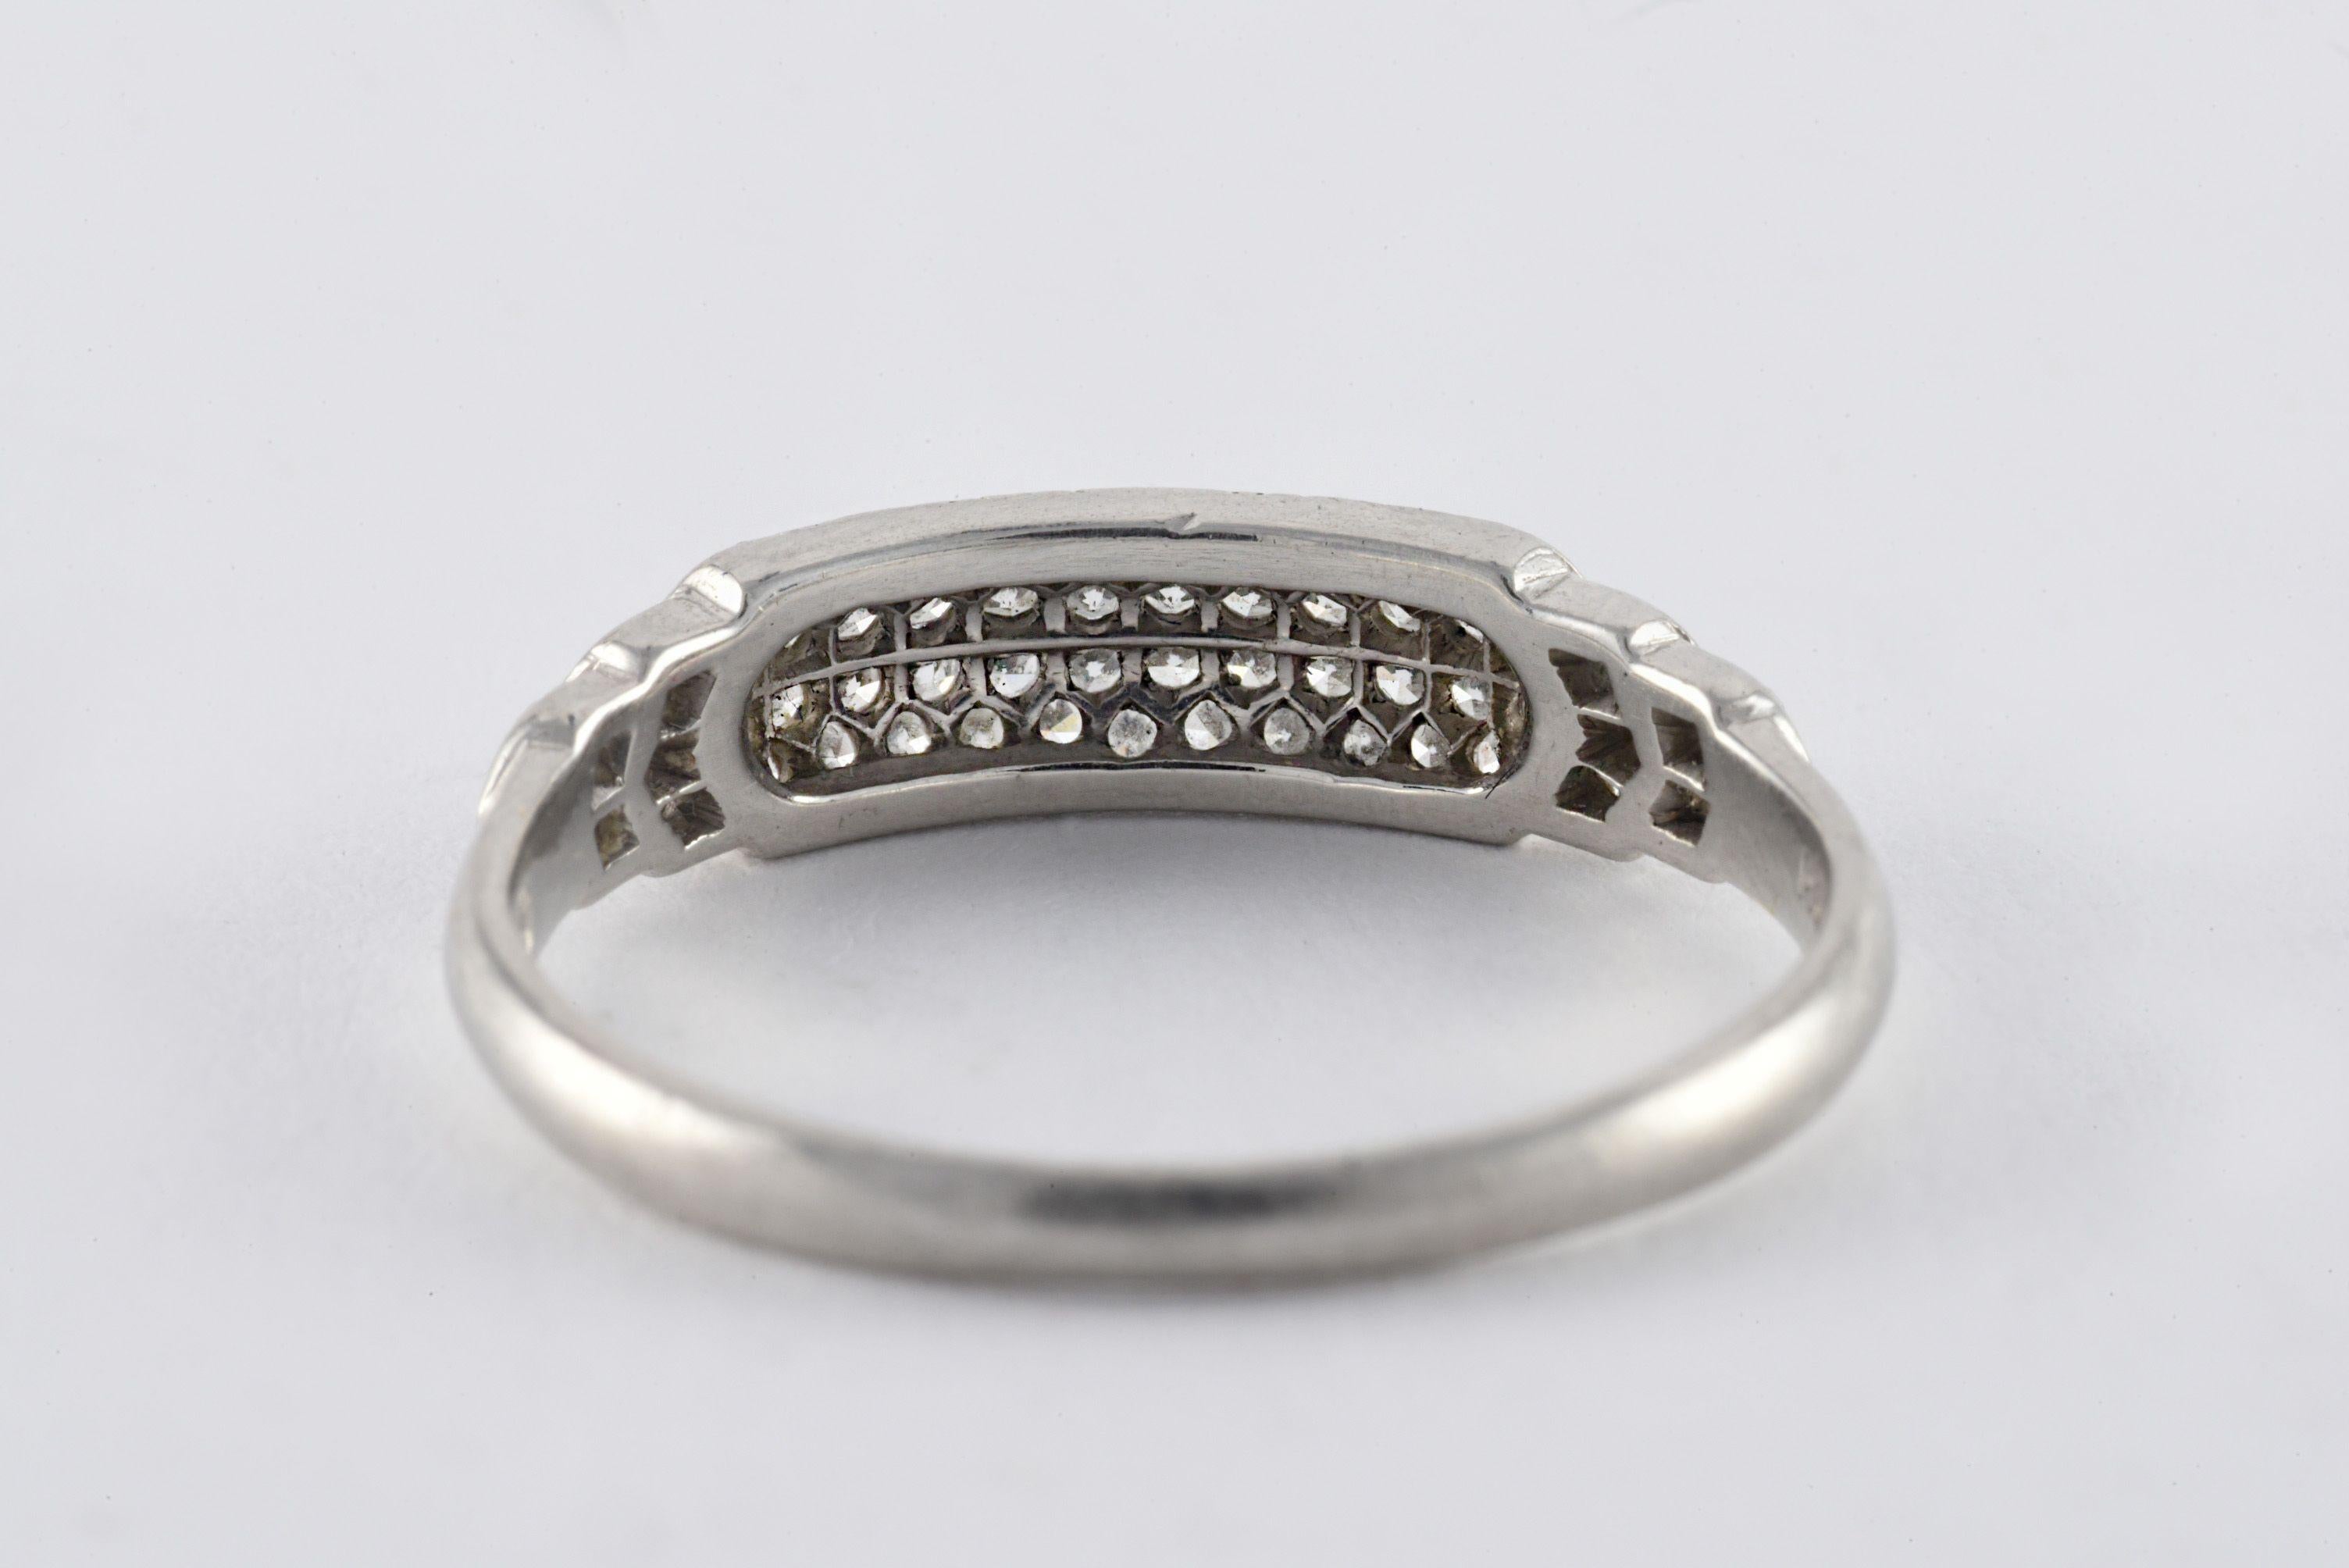 Four sparkling rows of single cut diamonds totaling 0.50 carats, F color, VS clarity adorn this vintage platinum pave band. 
